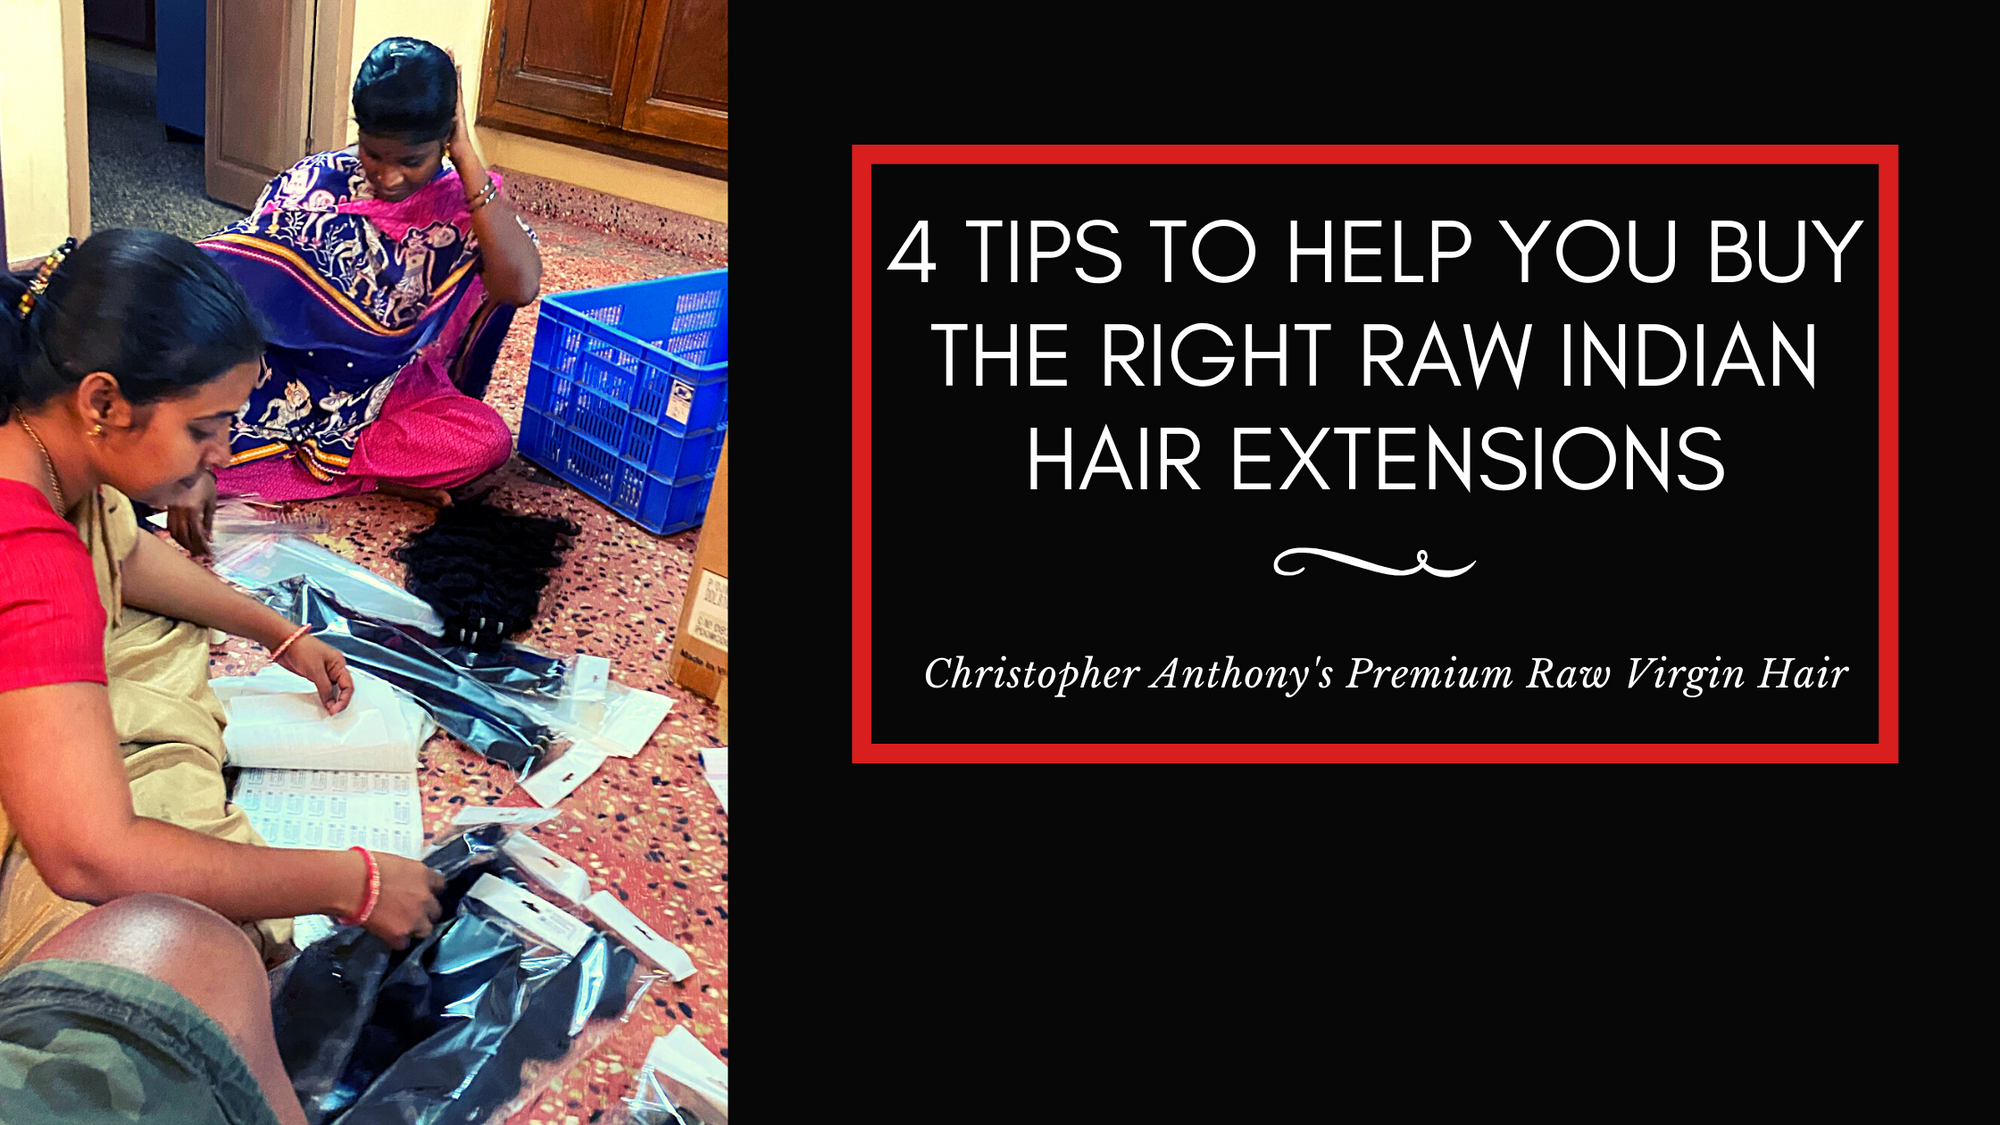 4 Tips to Help You Buy the Right Raw Indian Hair Extensions